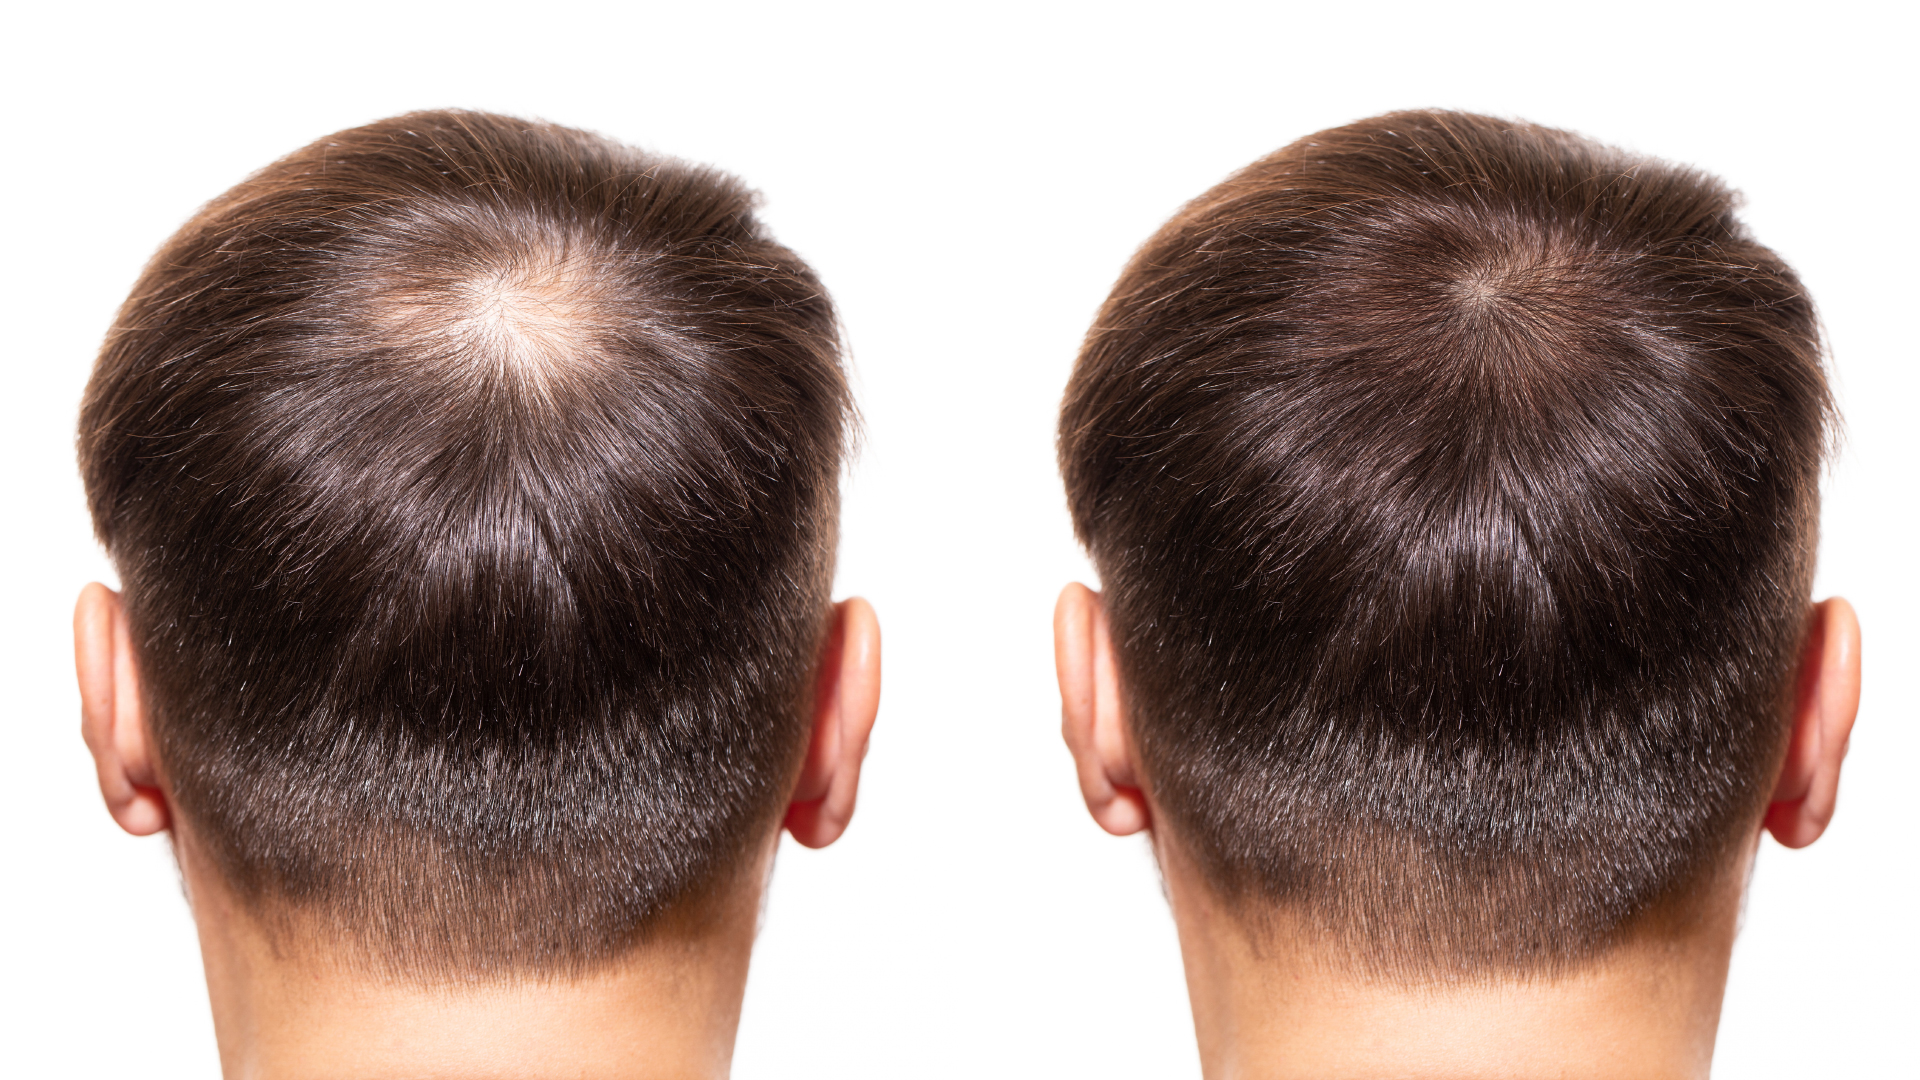 a man with baldness on the top of the skull having undergone a hair transplant, androgenetic alopecia being irreversible it is possible that he will have to perform a second hair transplant